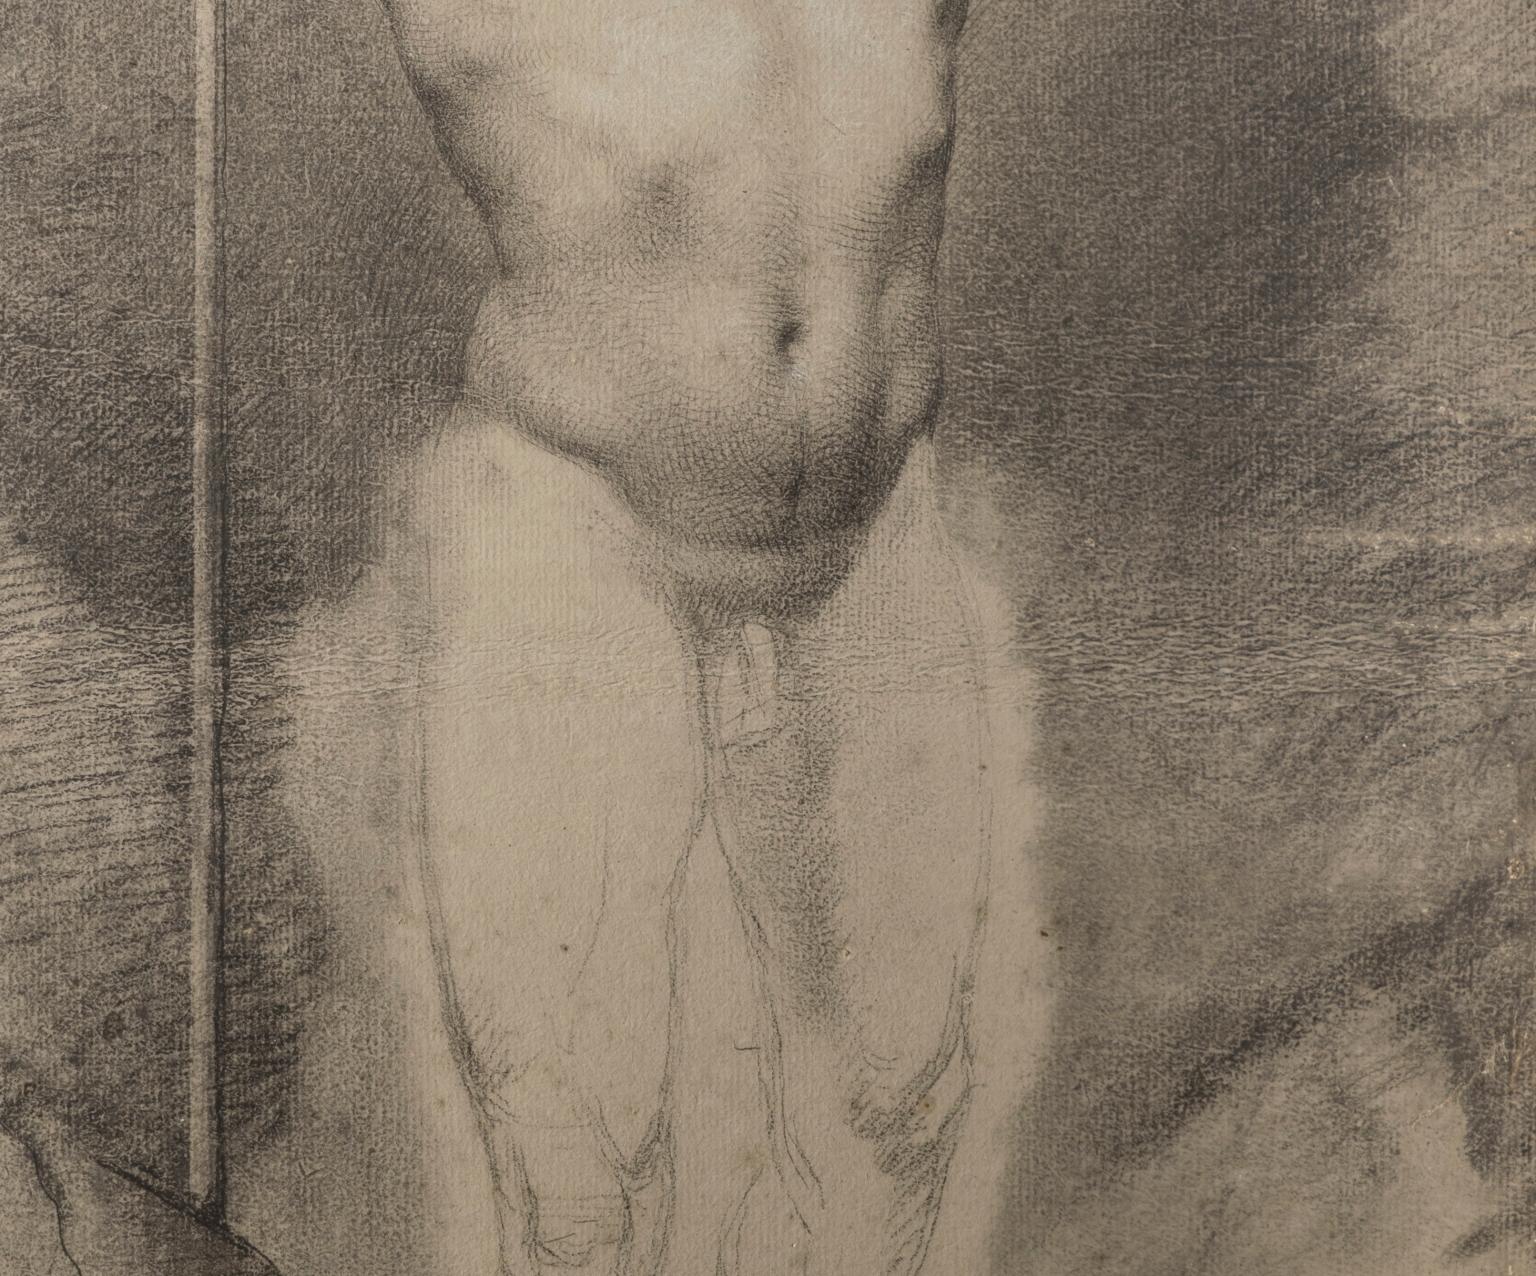 Placido Fabris Male Nude Portrait Drawings 1830s charcoal tempera laid paper For Sale 2